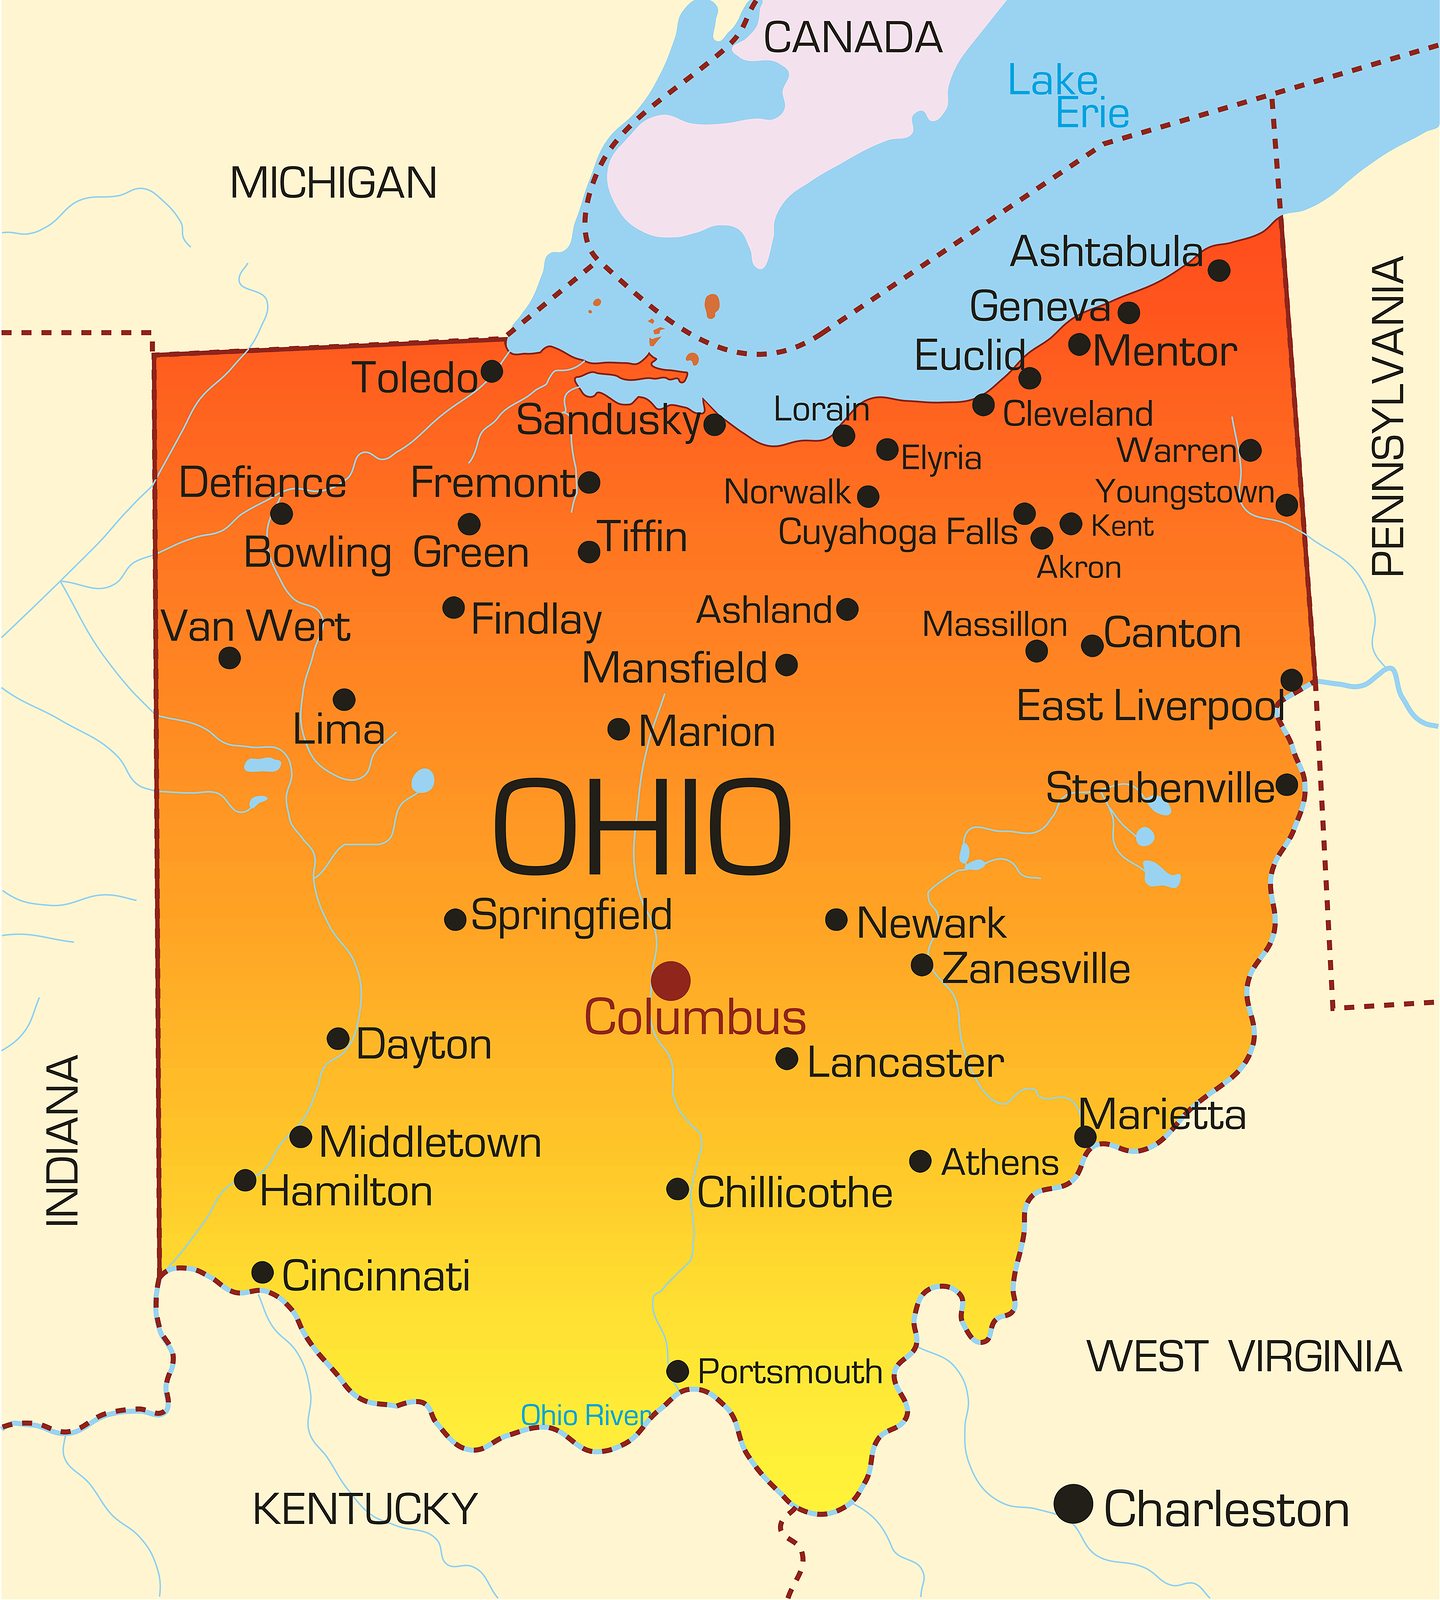 Ohio LPN Training Programs and Requirements